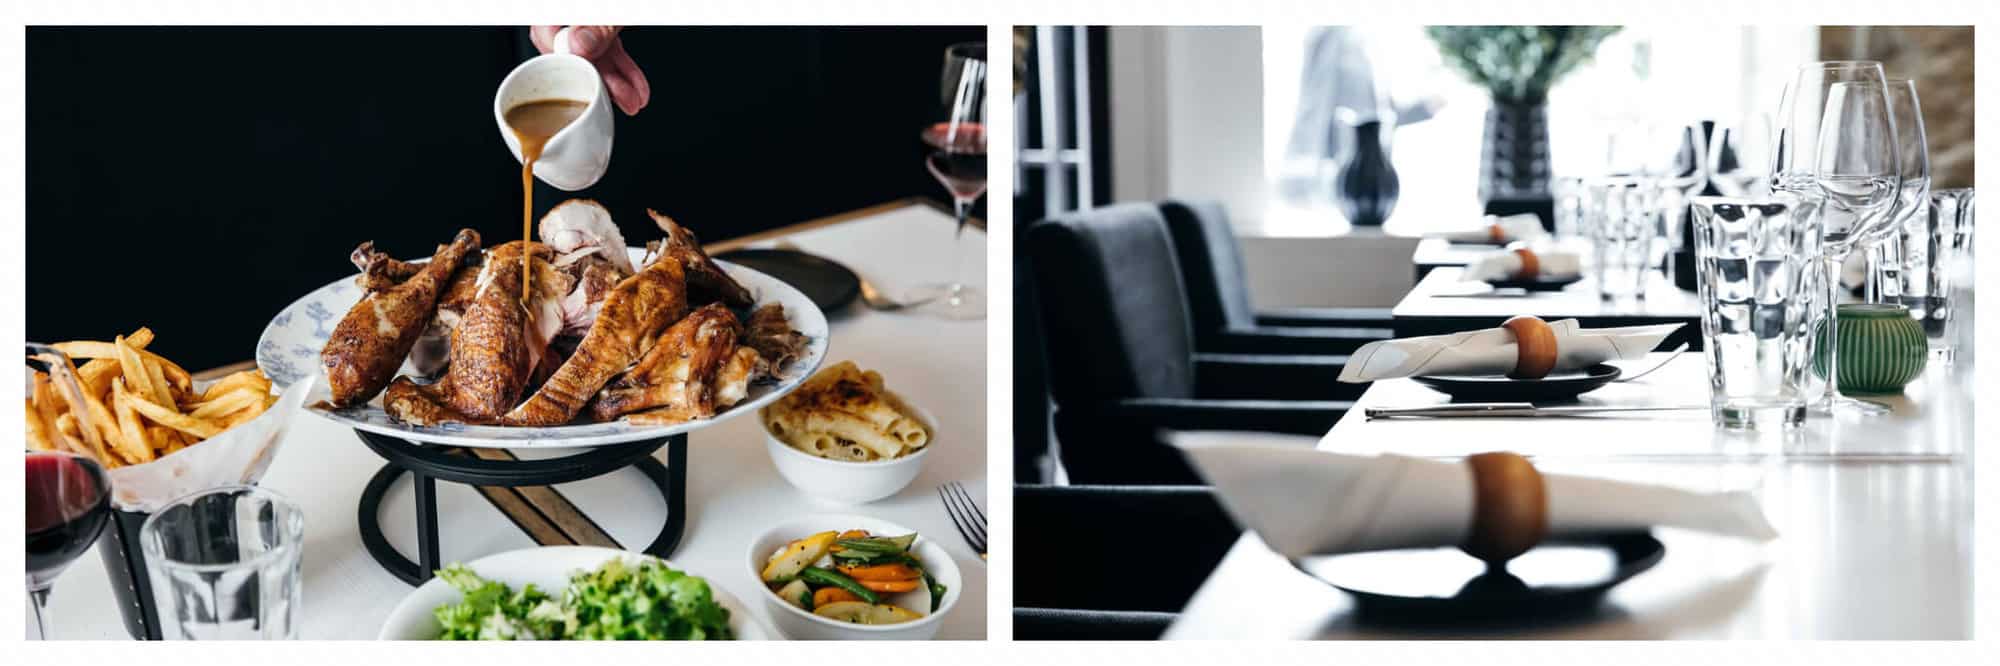 Left: a roast chicken with gravy being poured on top, with fries, salad, sides and glasses of wine on a table. Right: table settings at Le Coq & Fils restaurant.